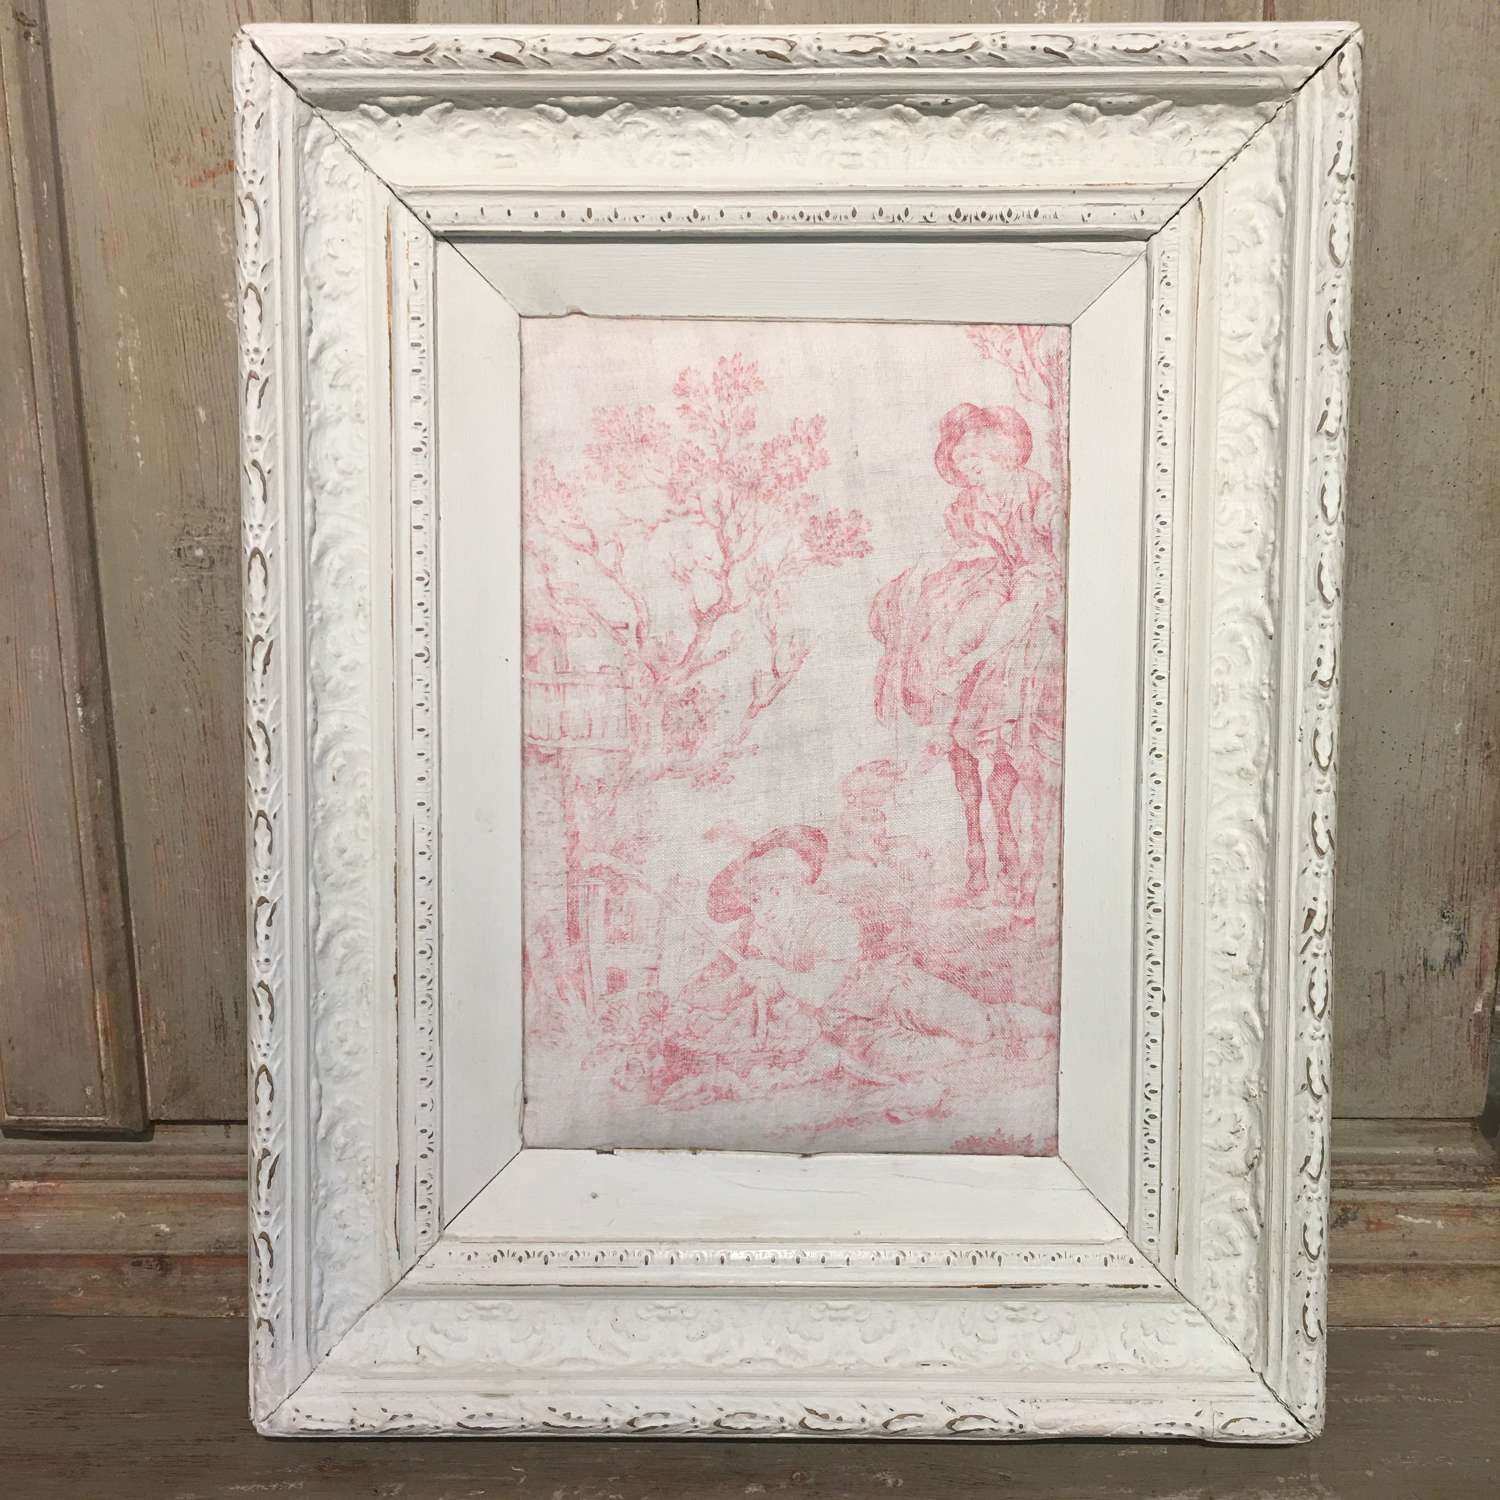 Early 19th century French toile in an antique French frame